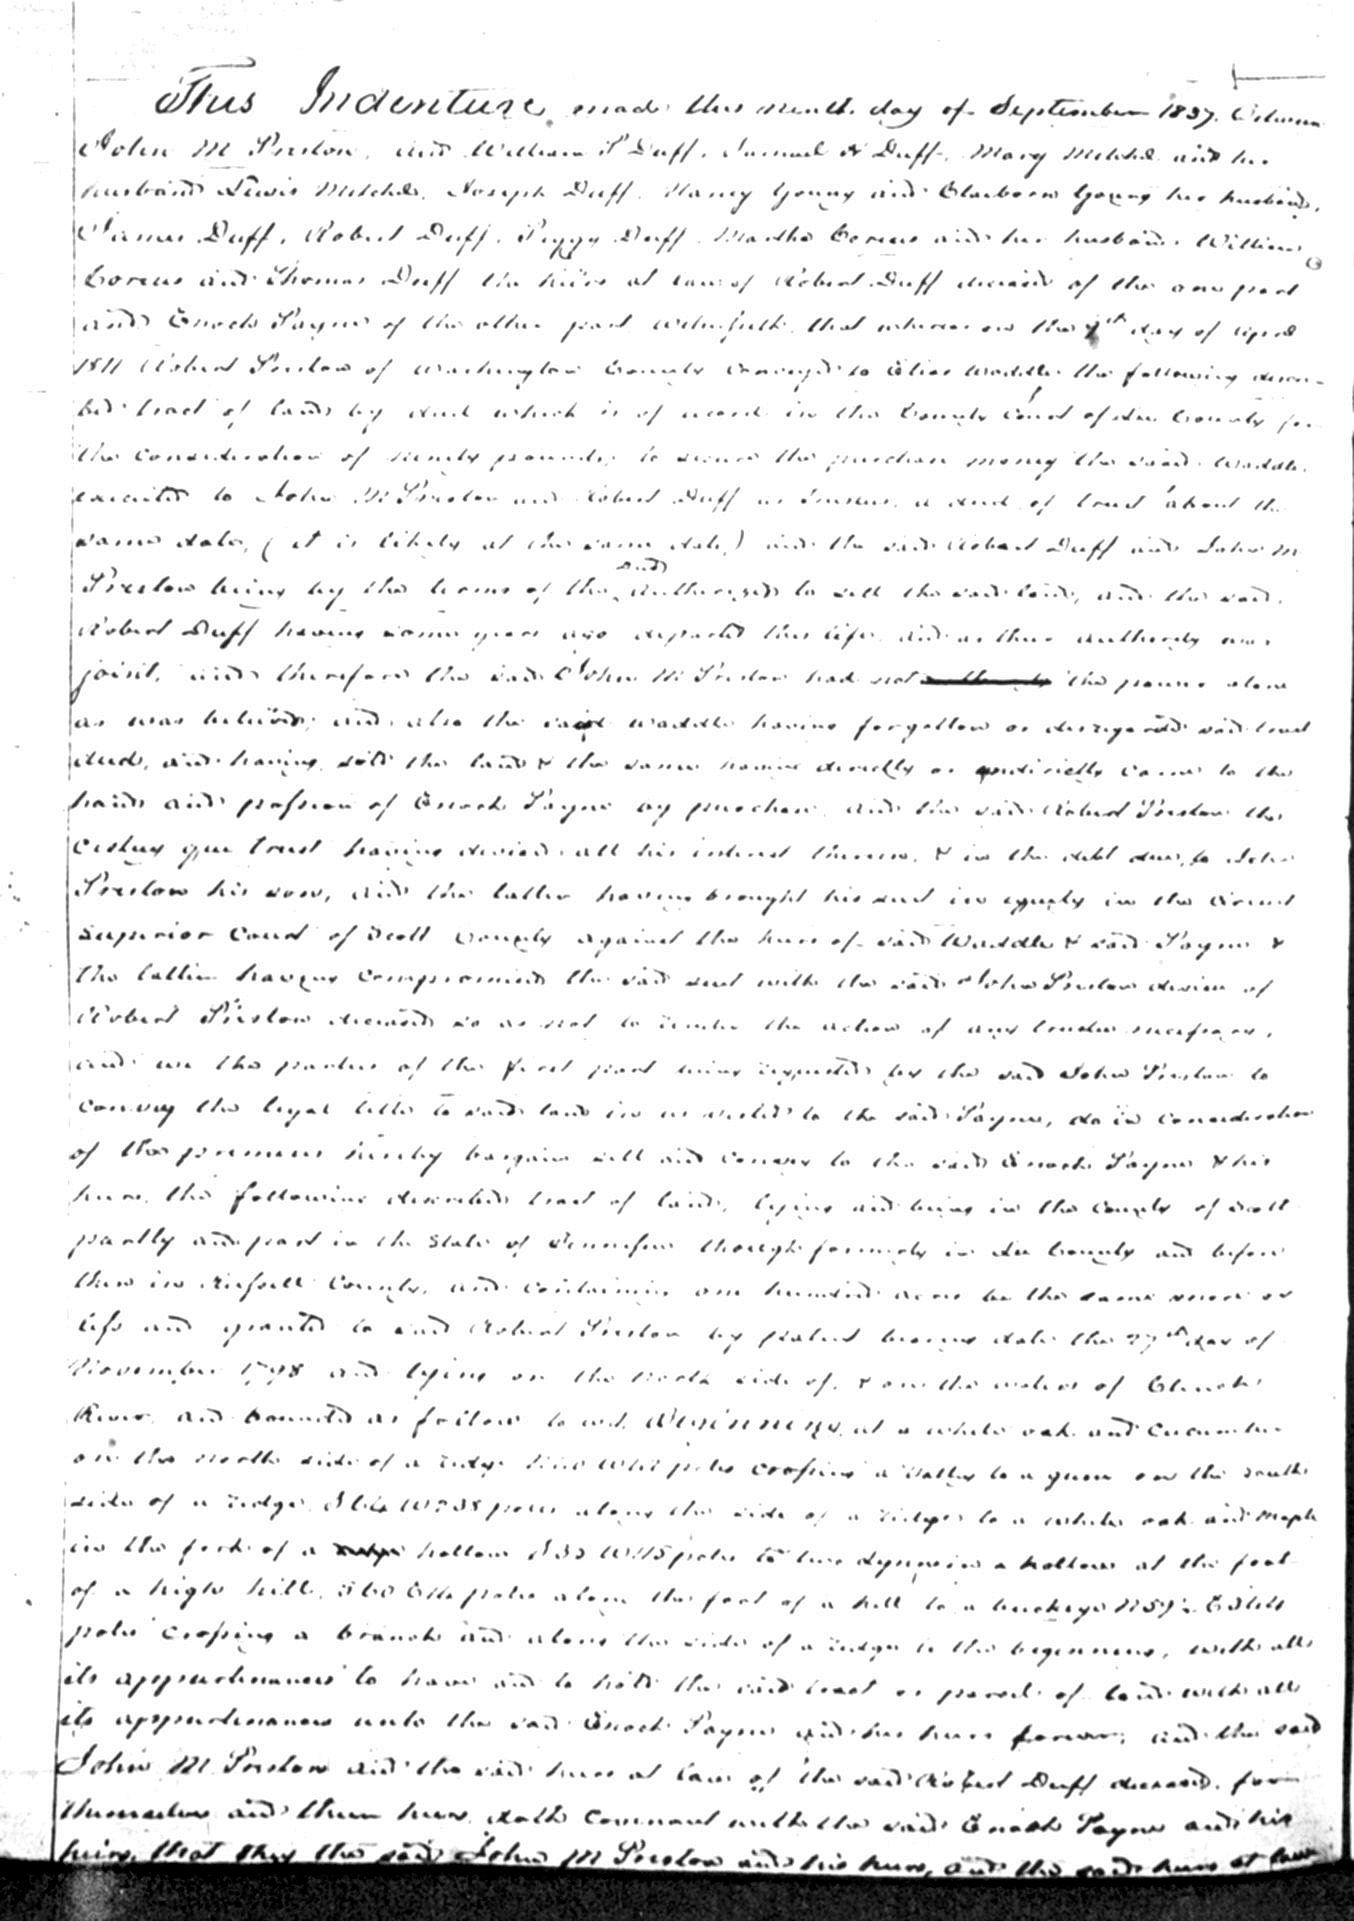 Enoch Payne and Duff Family Deed - 1837, Scott Co., Va  page 1